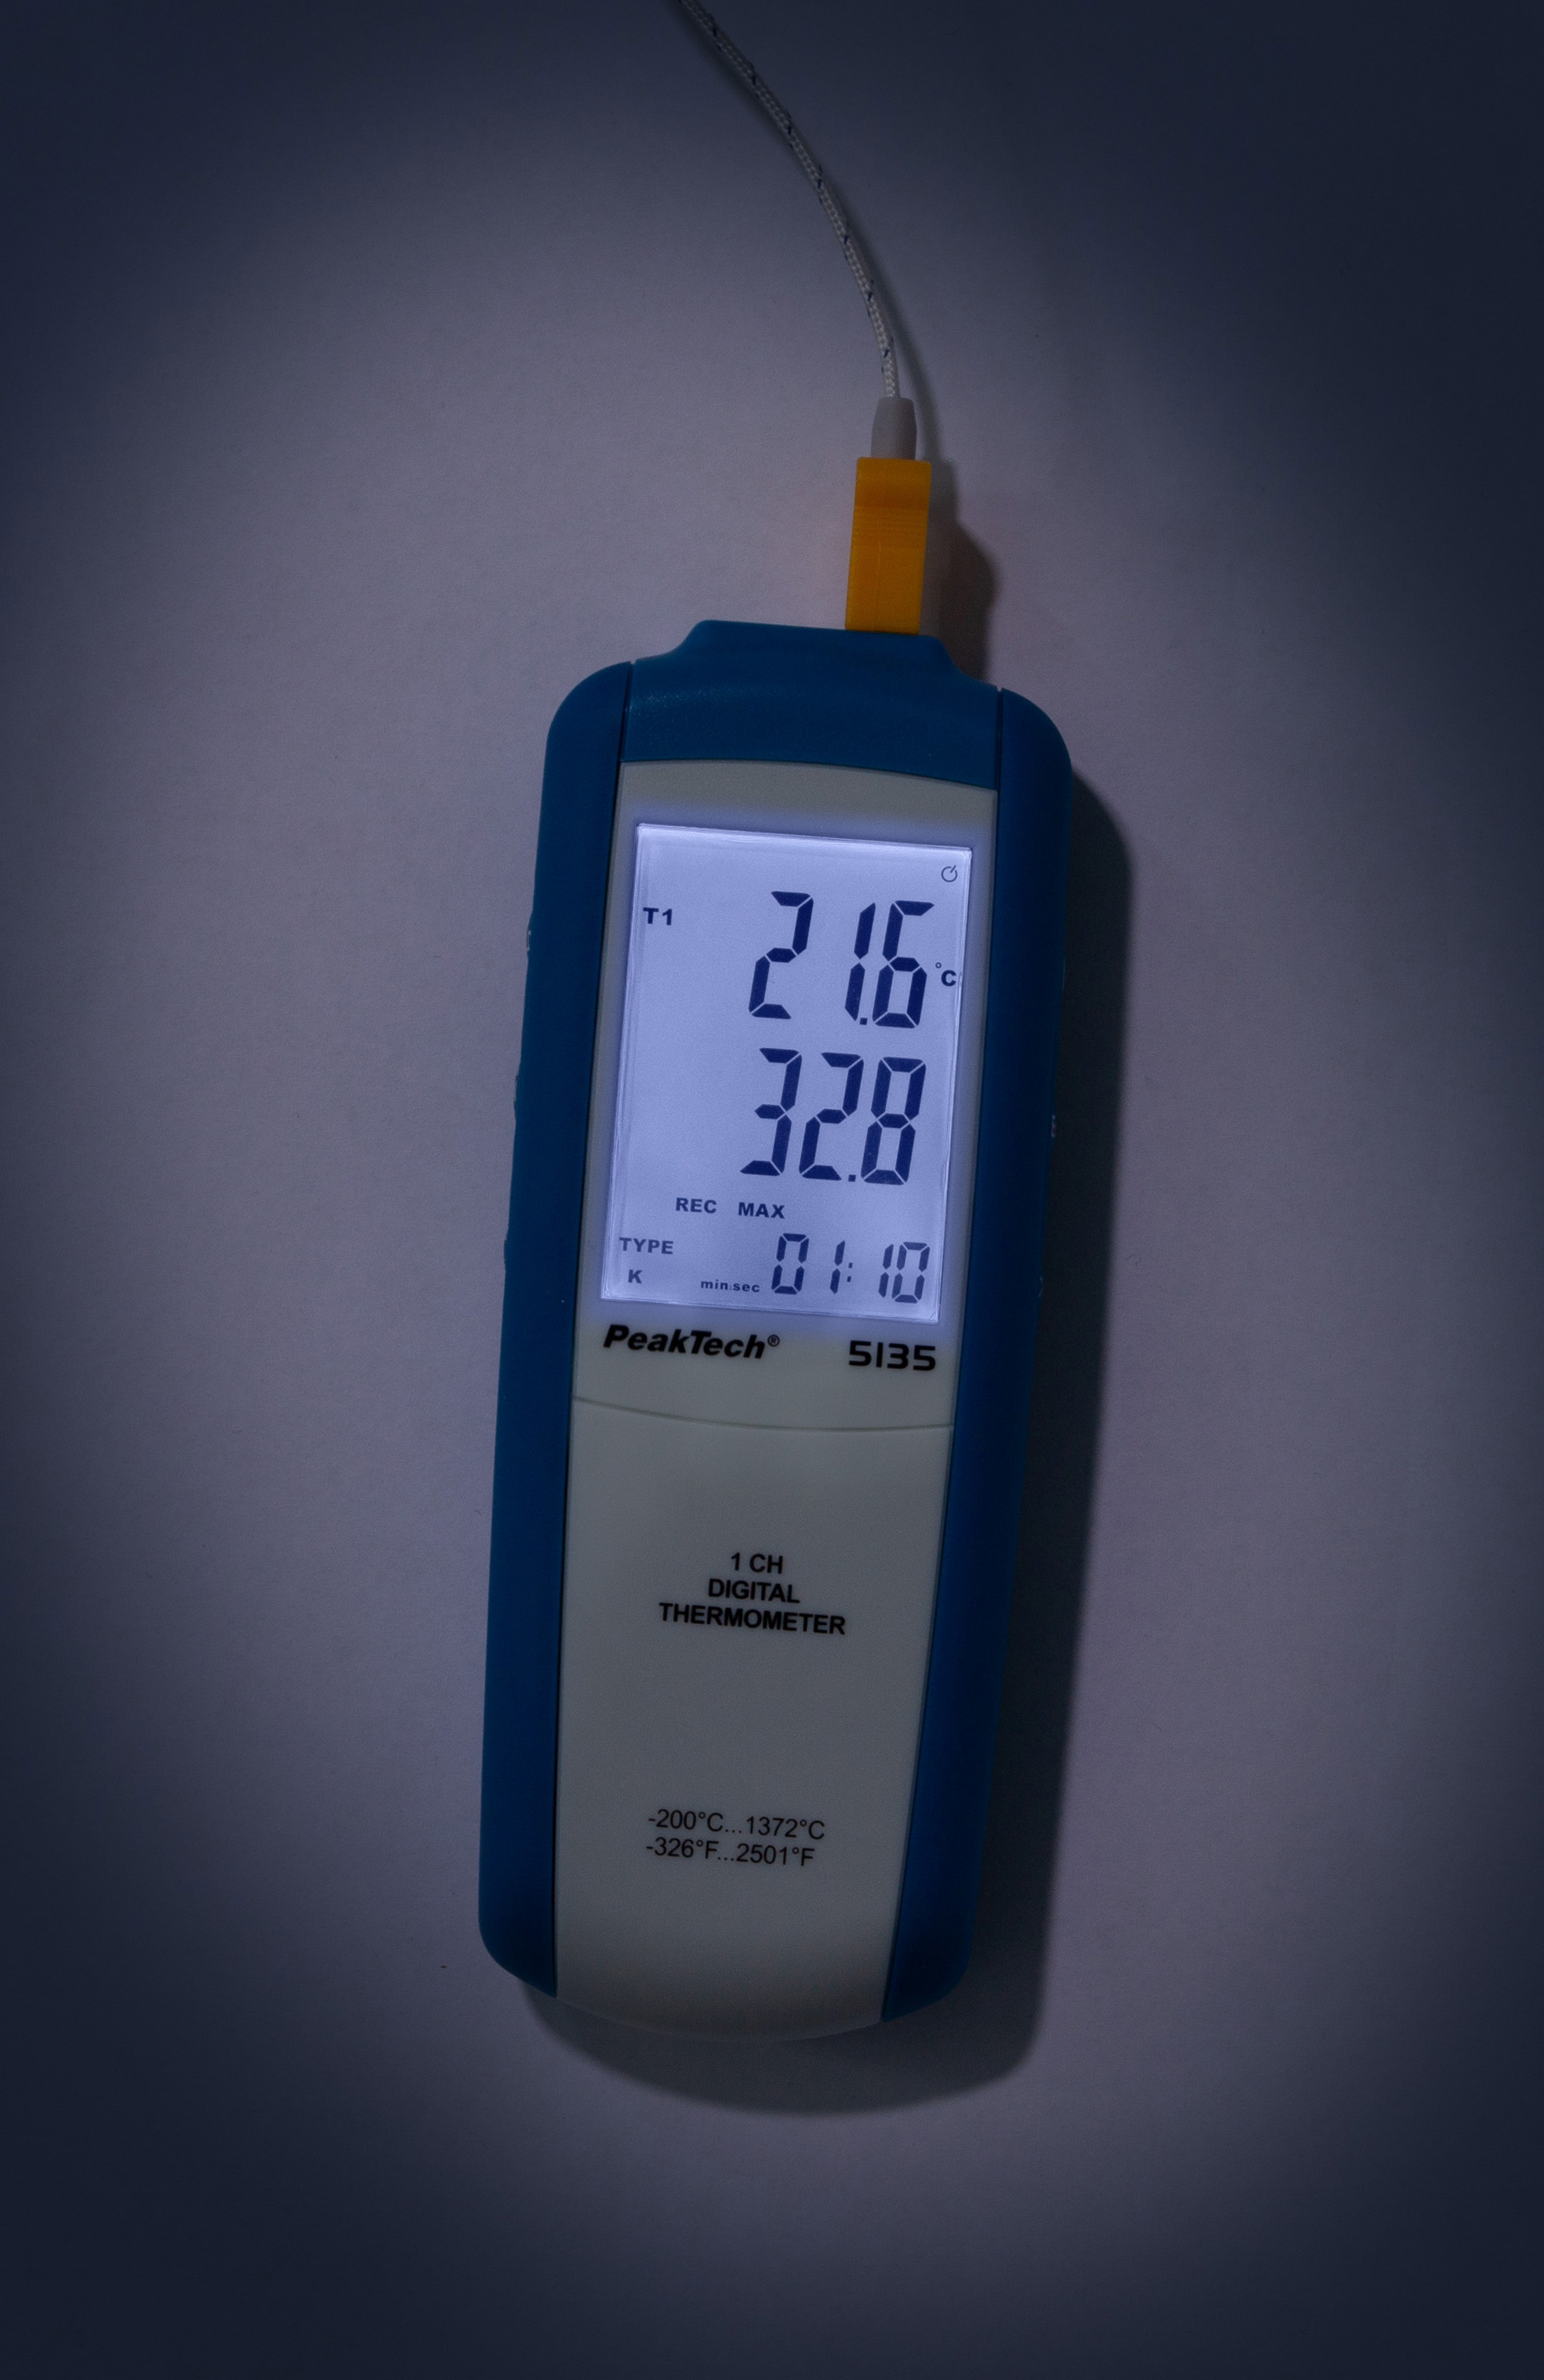 «PeakTech® P 5135» Digital-Thermometer 1 CH, -200...+1372°C